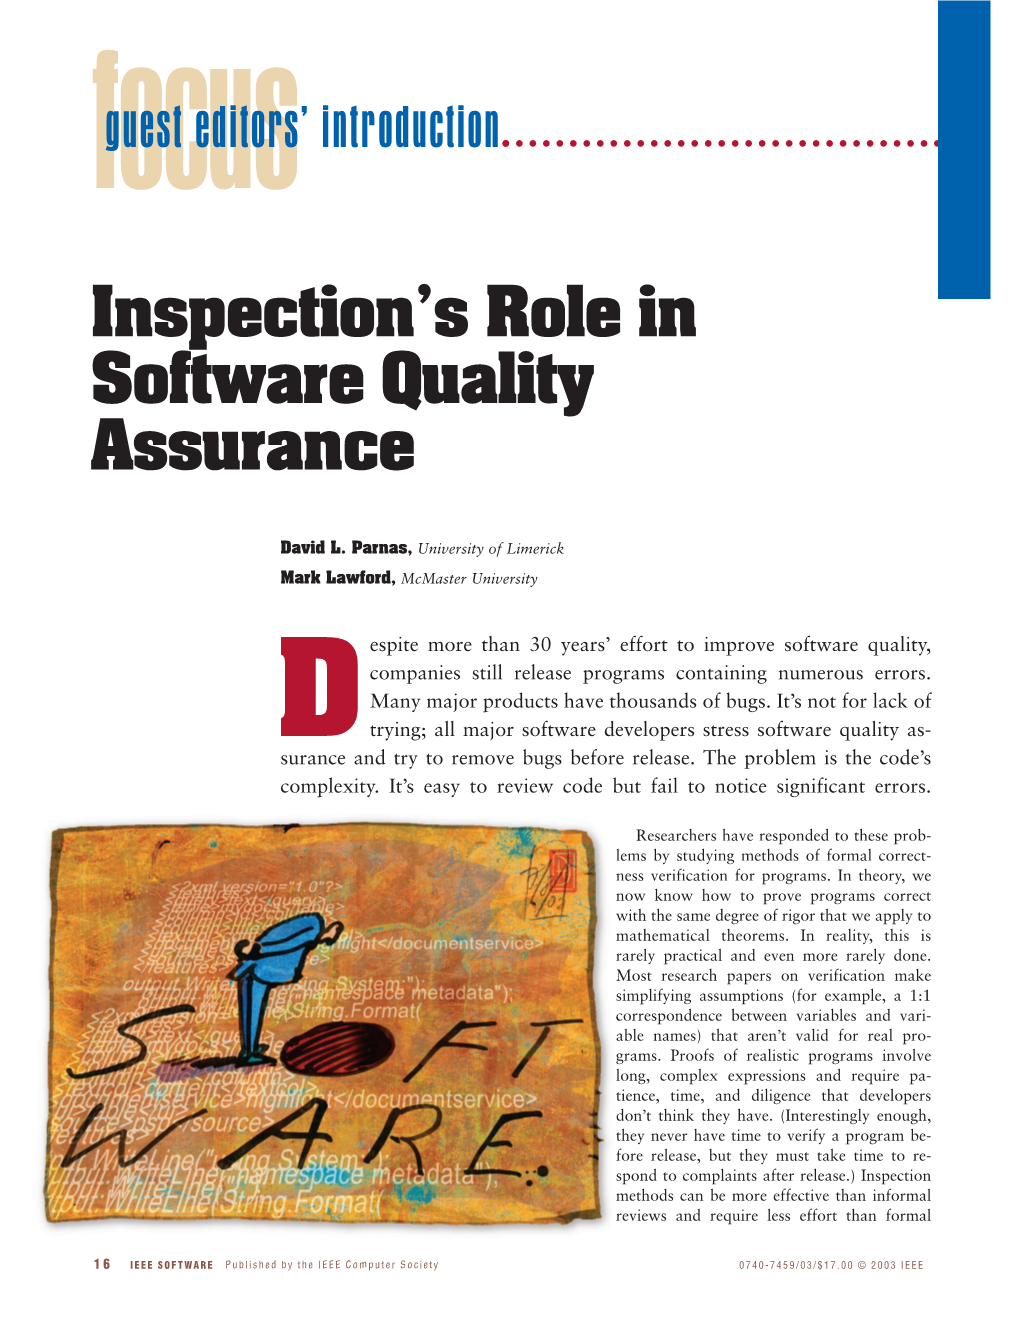 Inspection's Role in Software Quality Assurance Guest Editors' Introduction